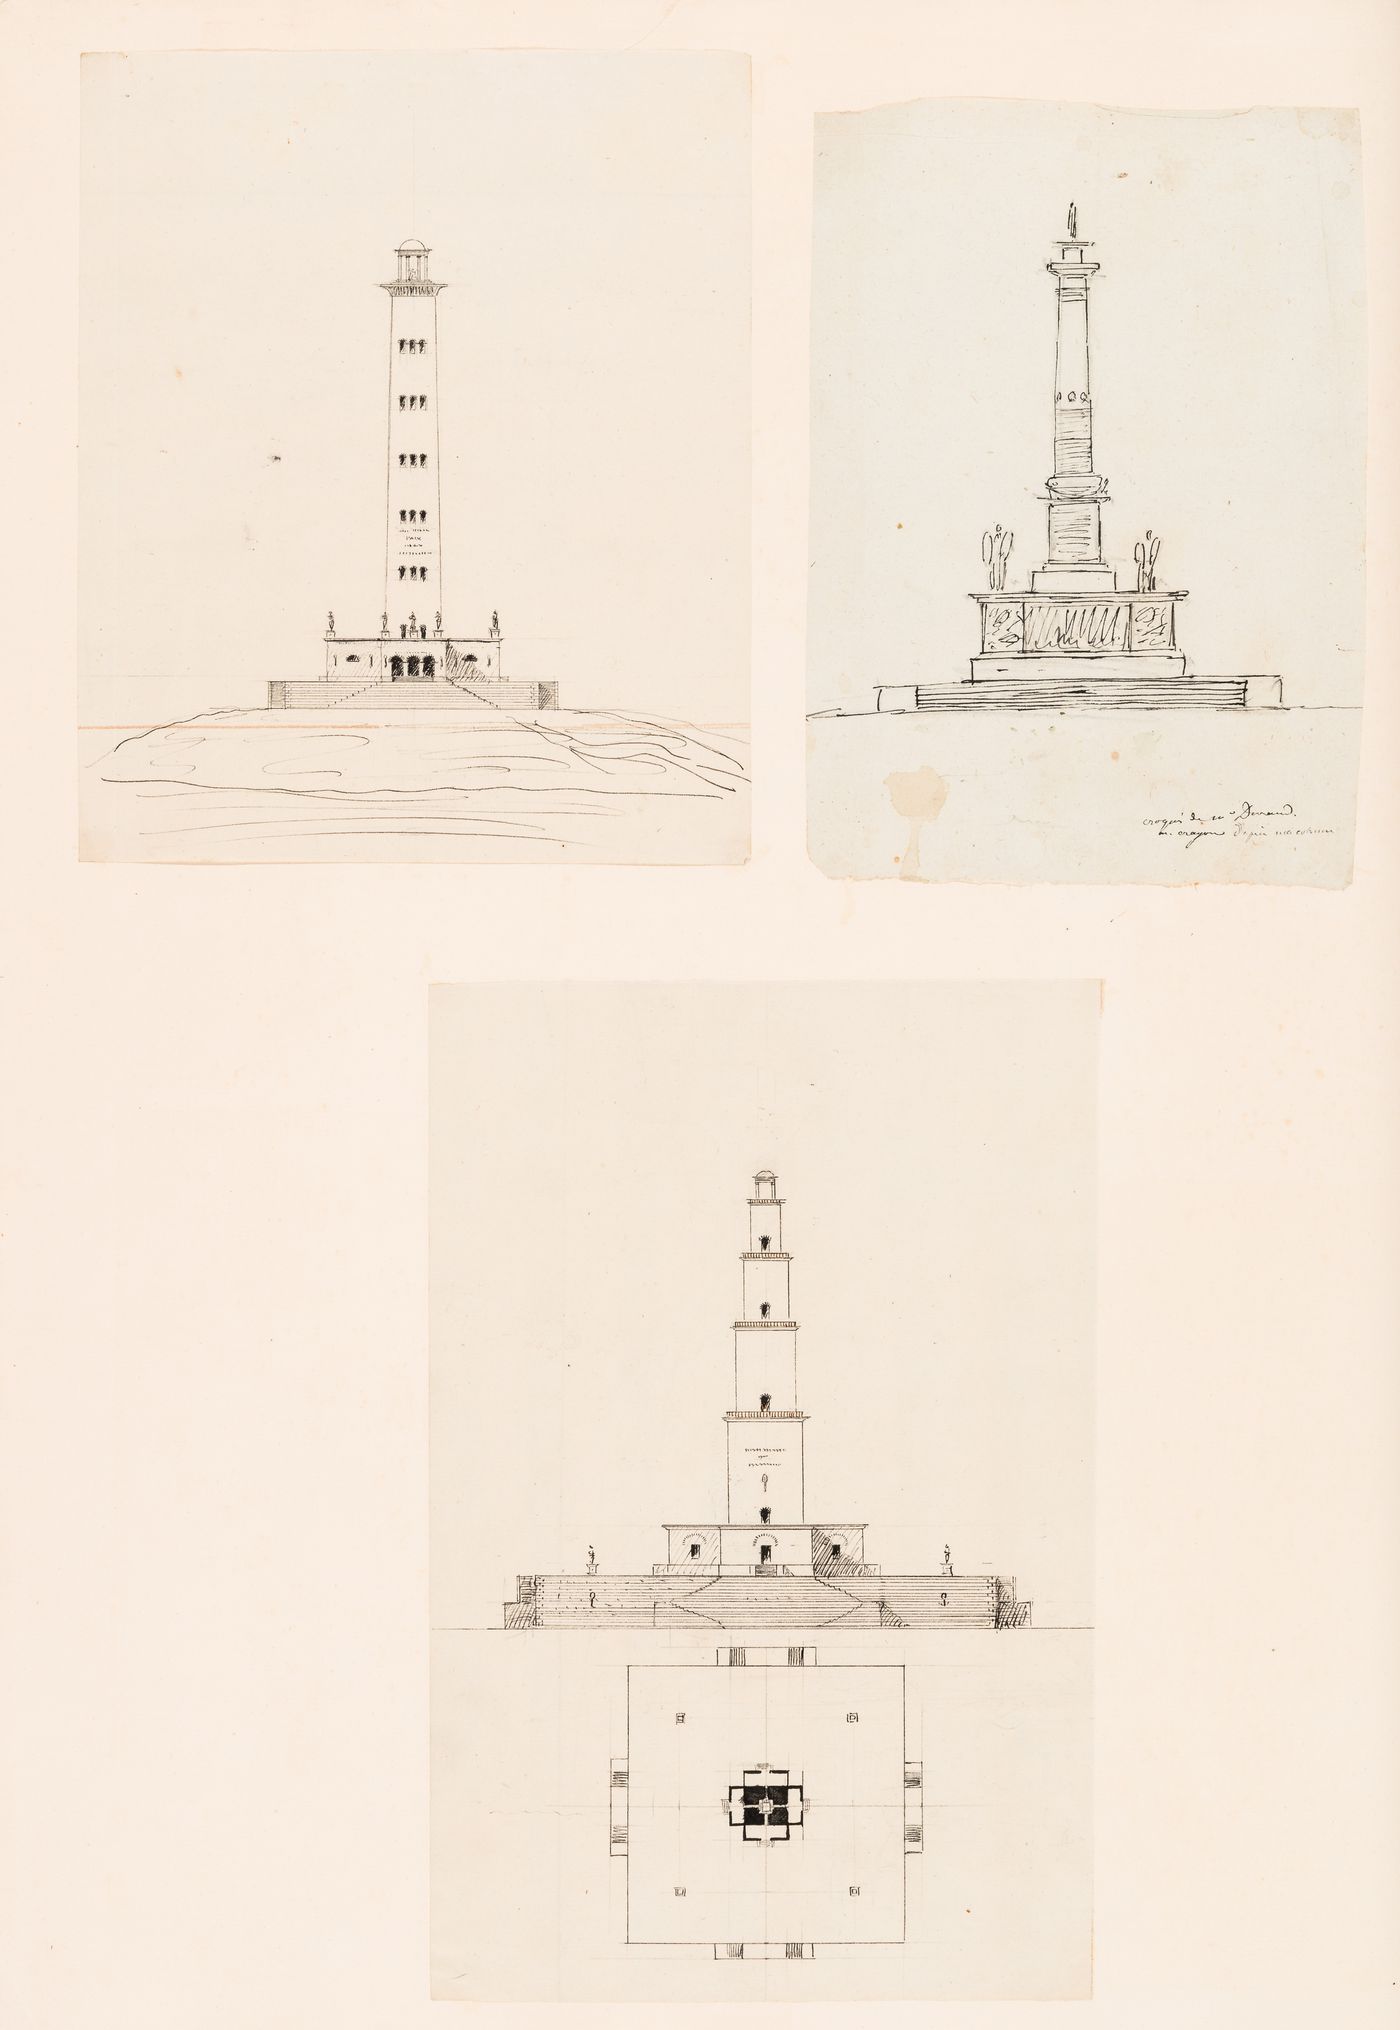 Elevation and site plan for a country house; verso: Plan and sketch elevations showing three alternate designs for a monument